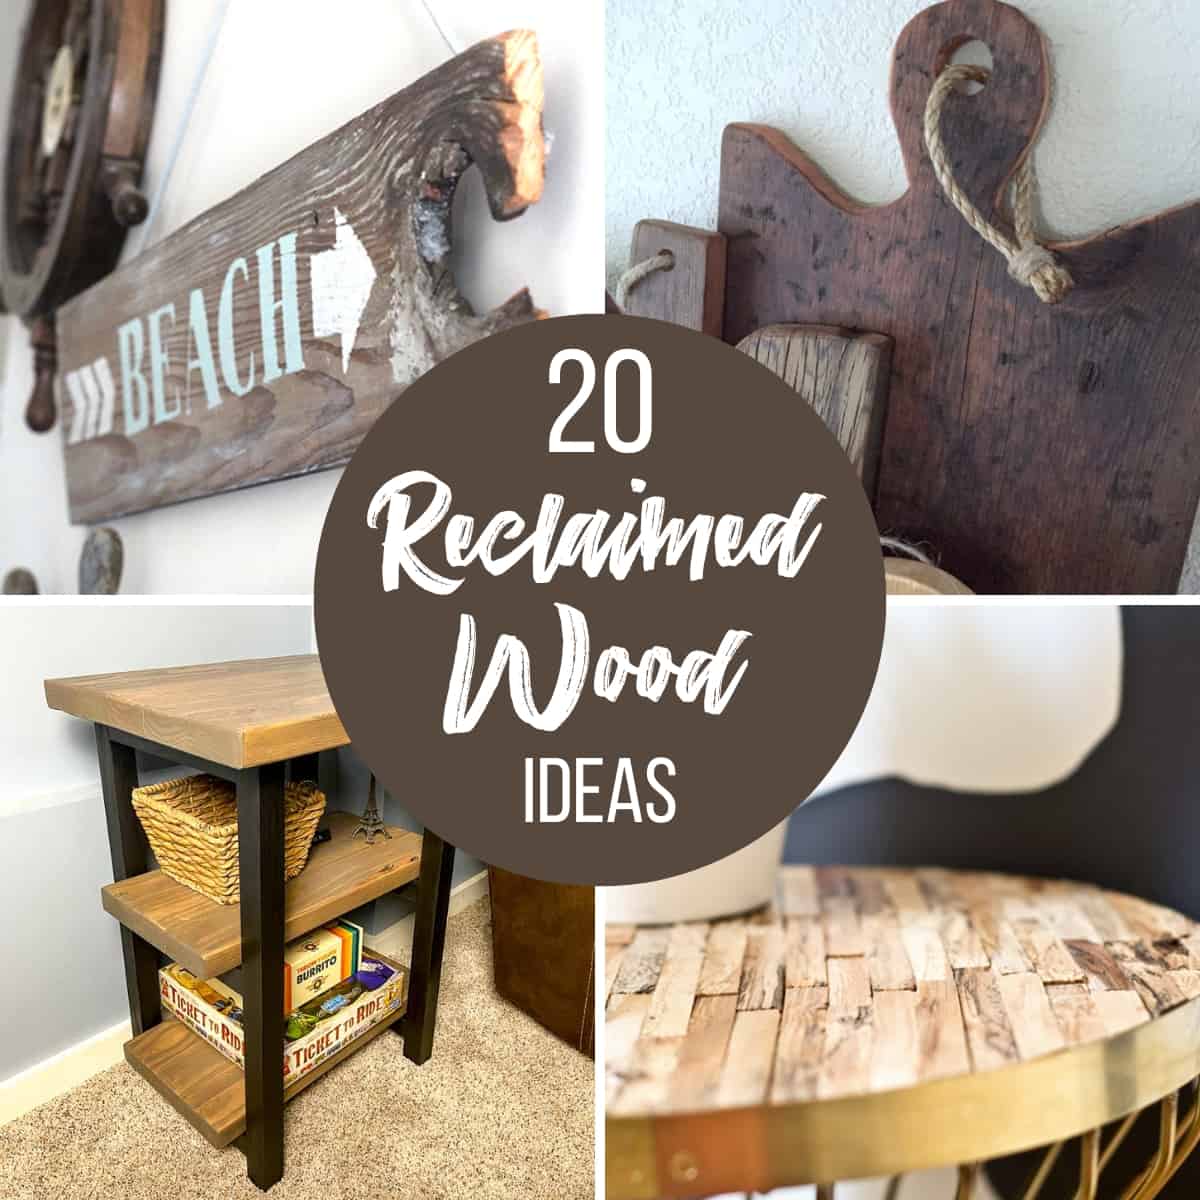 60 Wood Craft Ideas for home decor and gifts - Craftionary